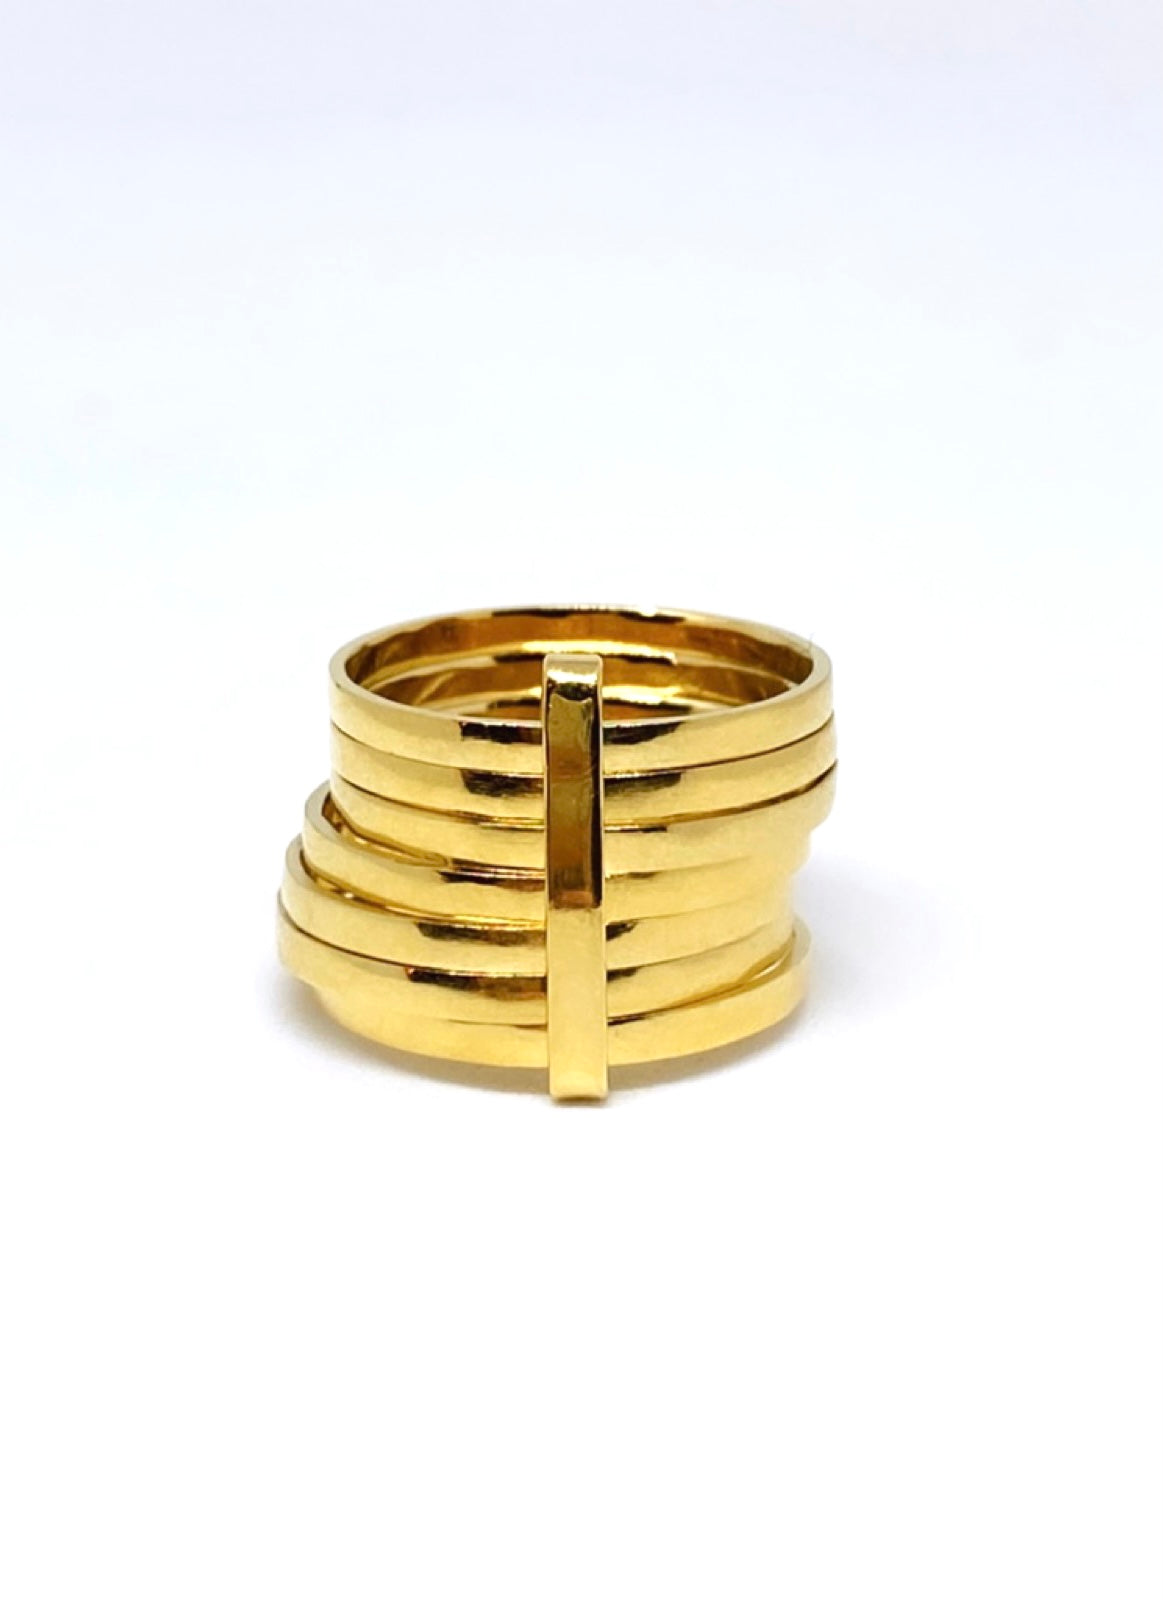 The Pirouette Ring